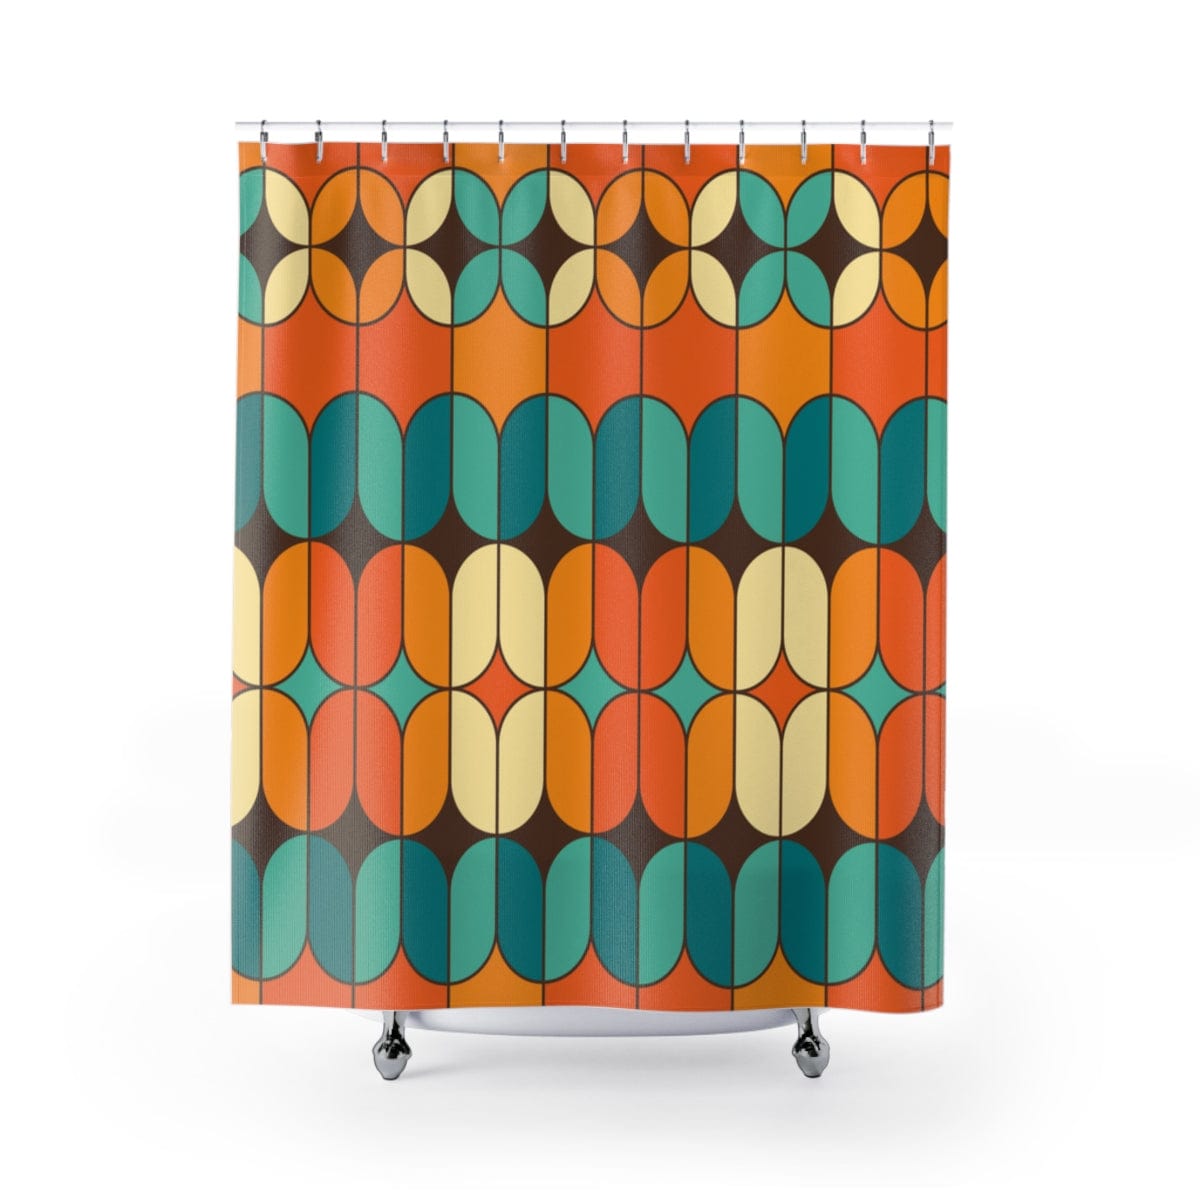 Mid Century Modern Orange, Brown, Teal and Cream Retro Shower Curtain Home Decor 71&quot; × 74&quot;